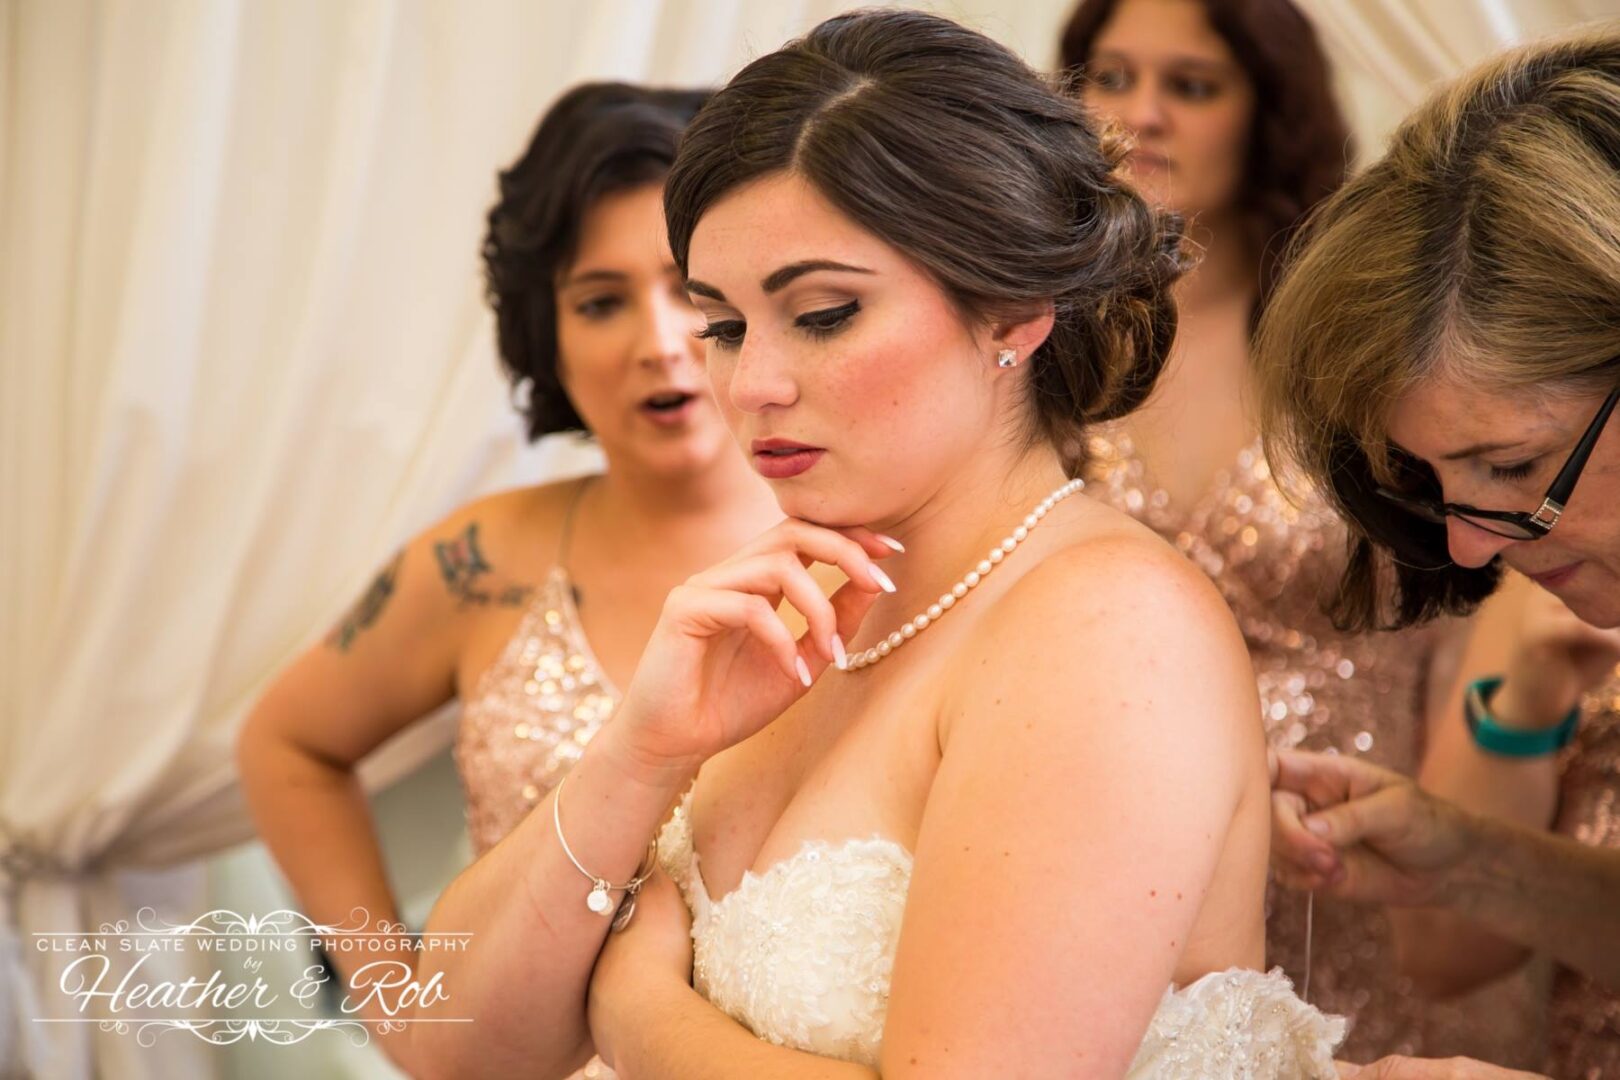 A bride getting ready with her bridesmaids.